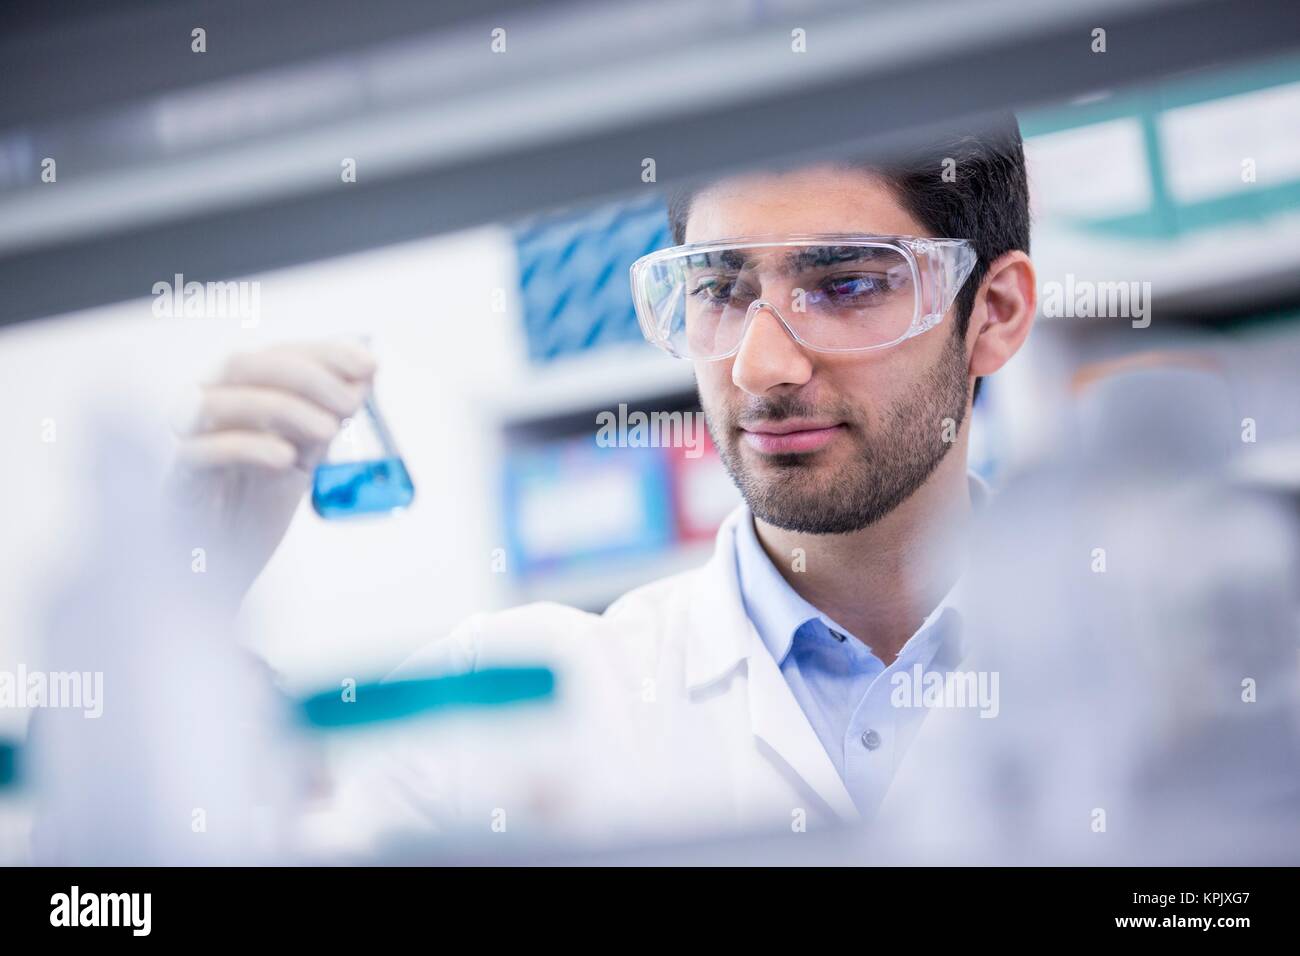 Laboratory assistant wearing safety goggles looking at chemical flask. Stock Photo